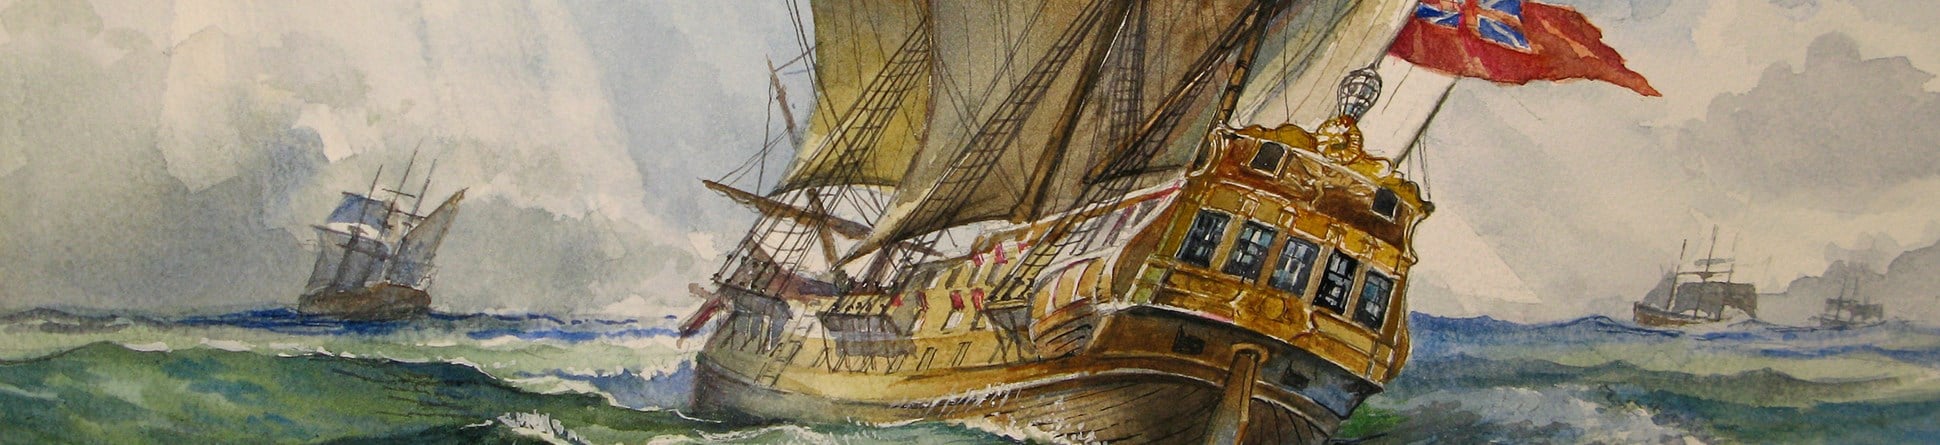 A painting of a warship under sail with three other vessels in the background.